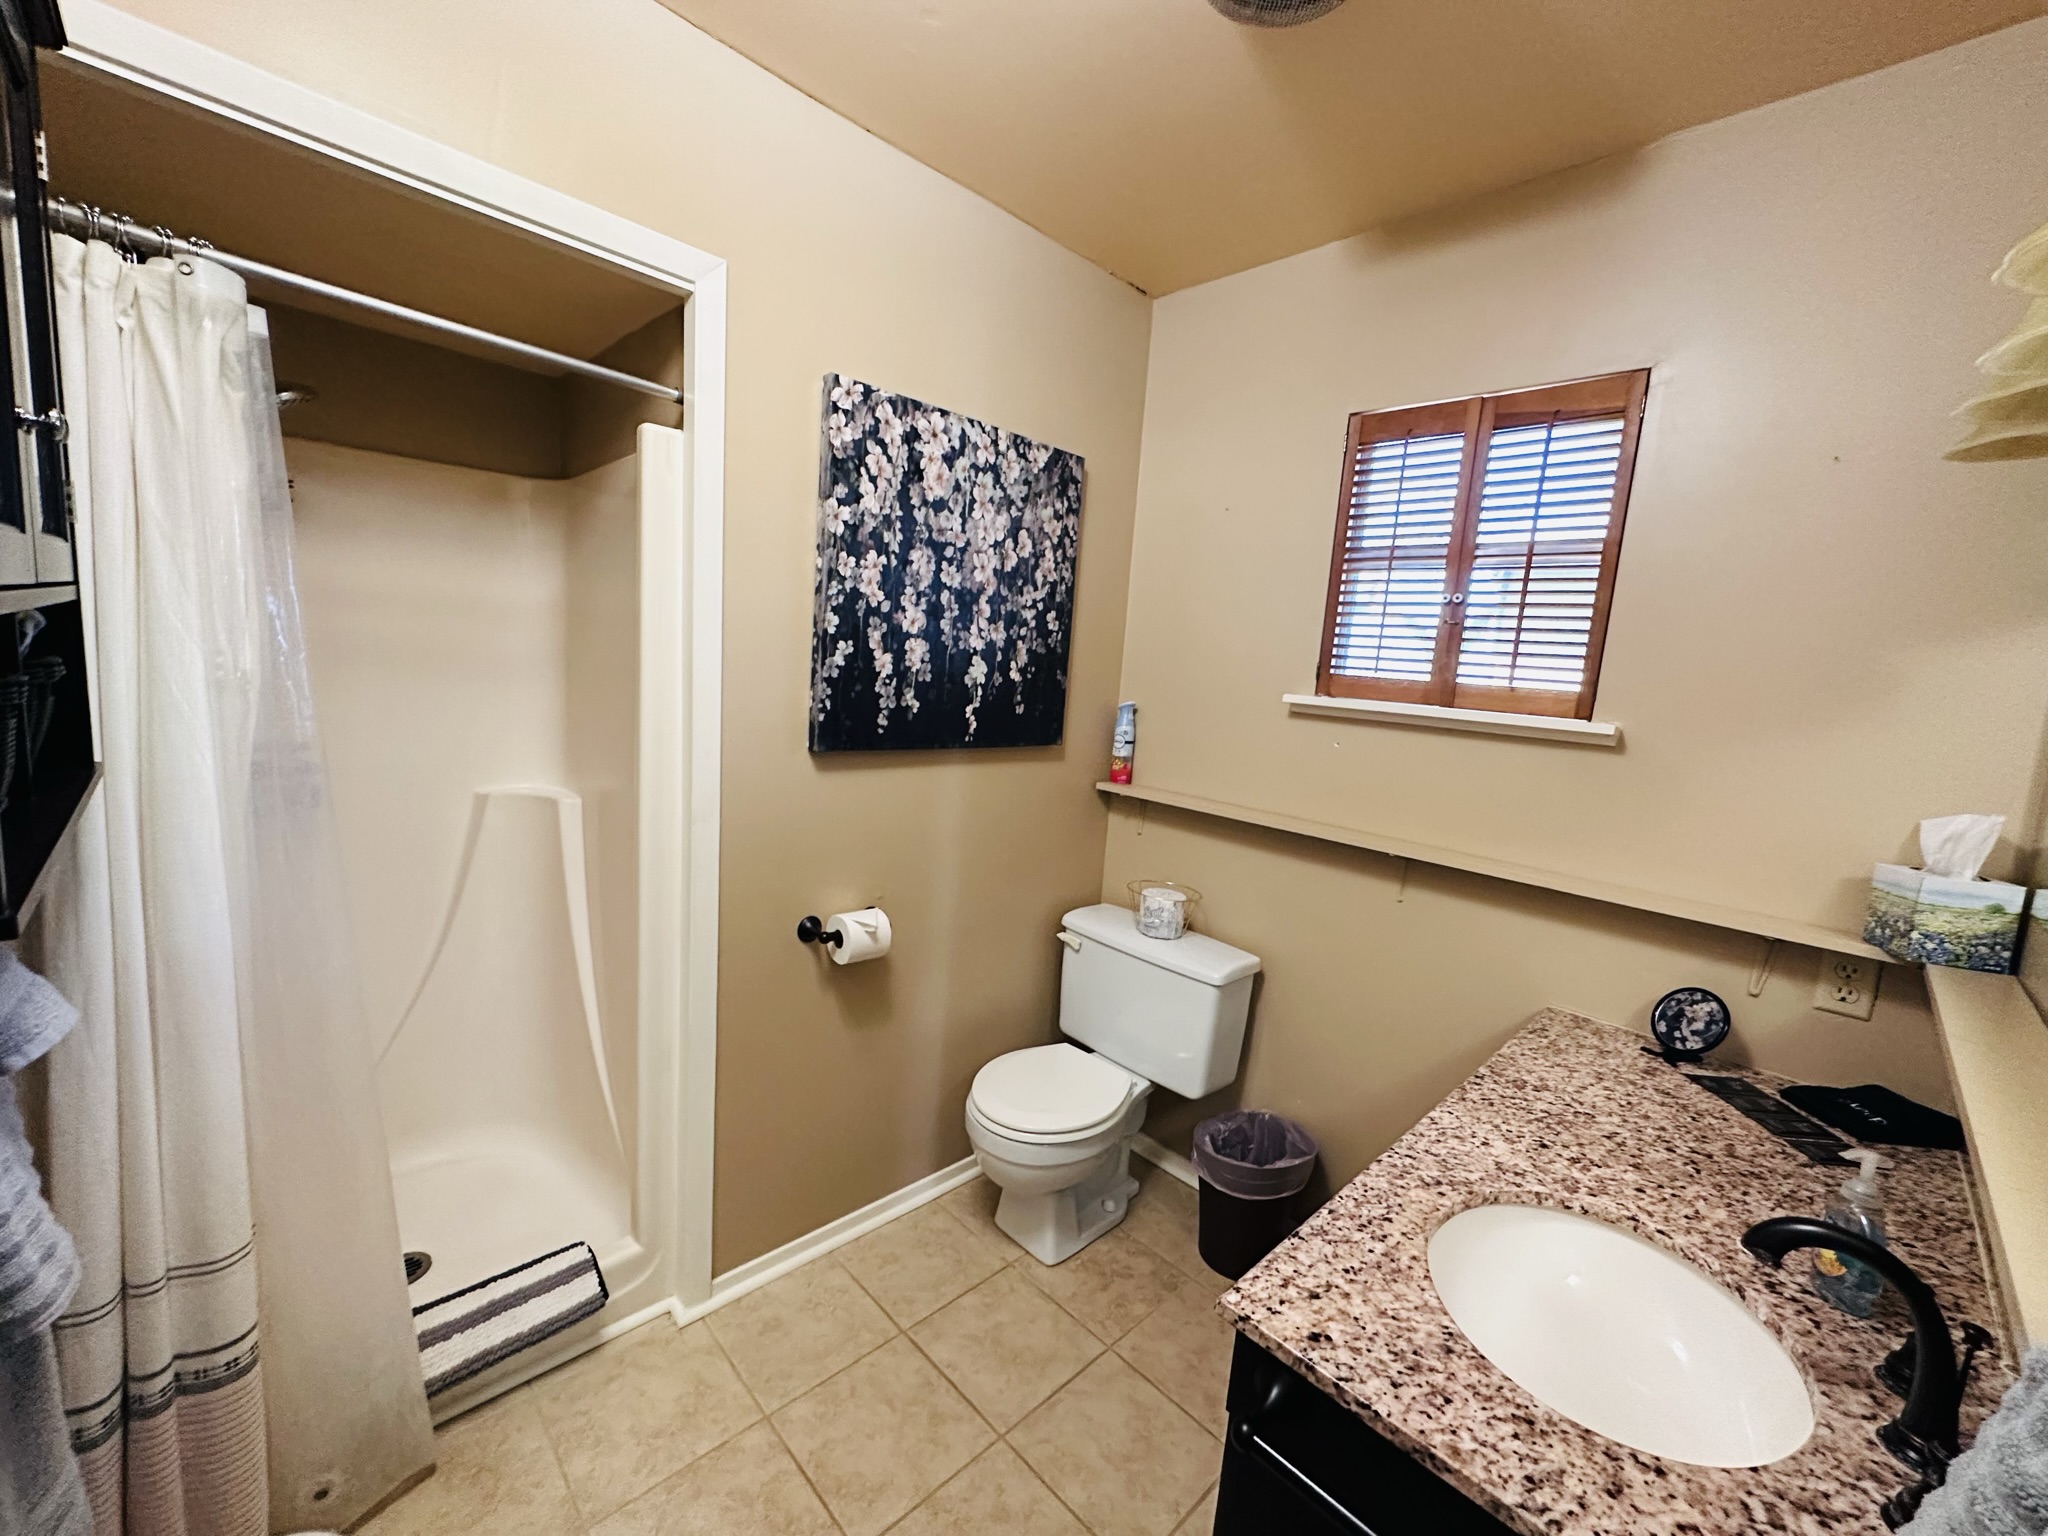                                                 Fresh linens are provided in the spotlessly-clean full bath, with a roomy shower stall and single vanity.